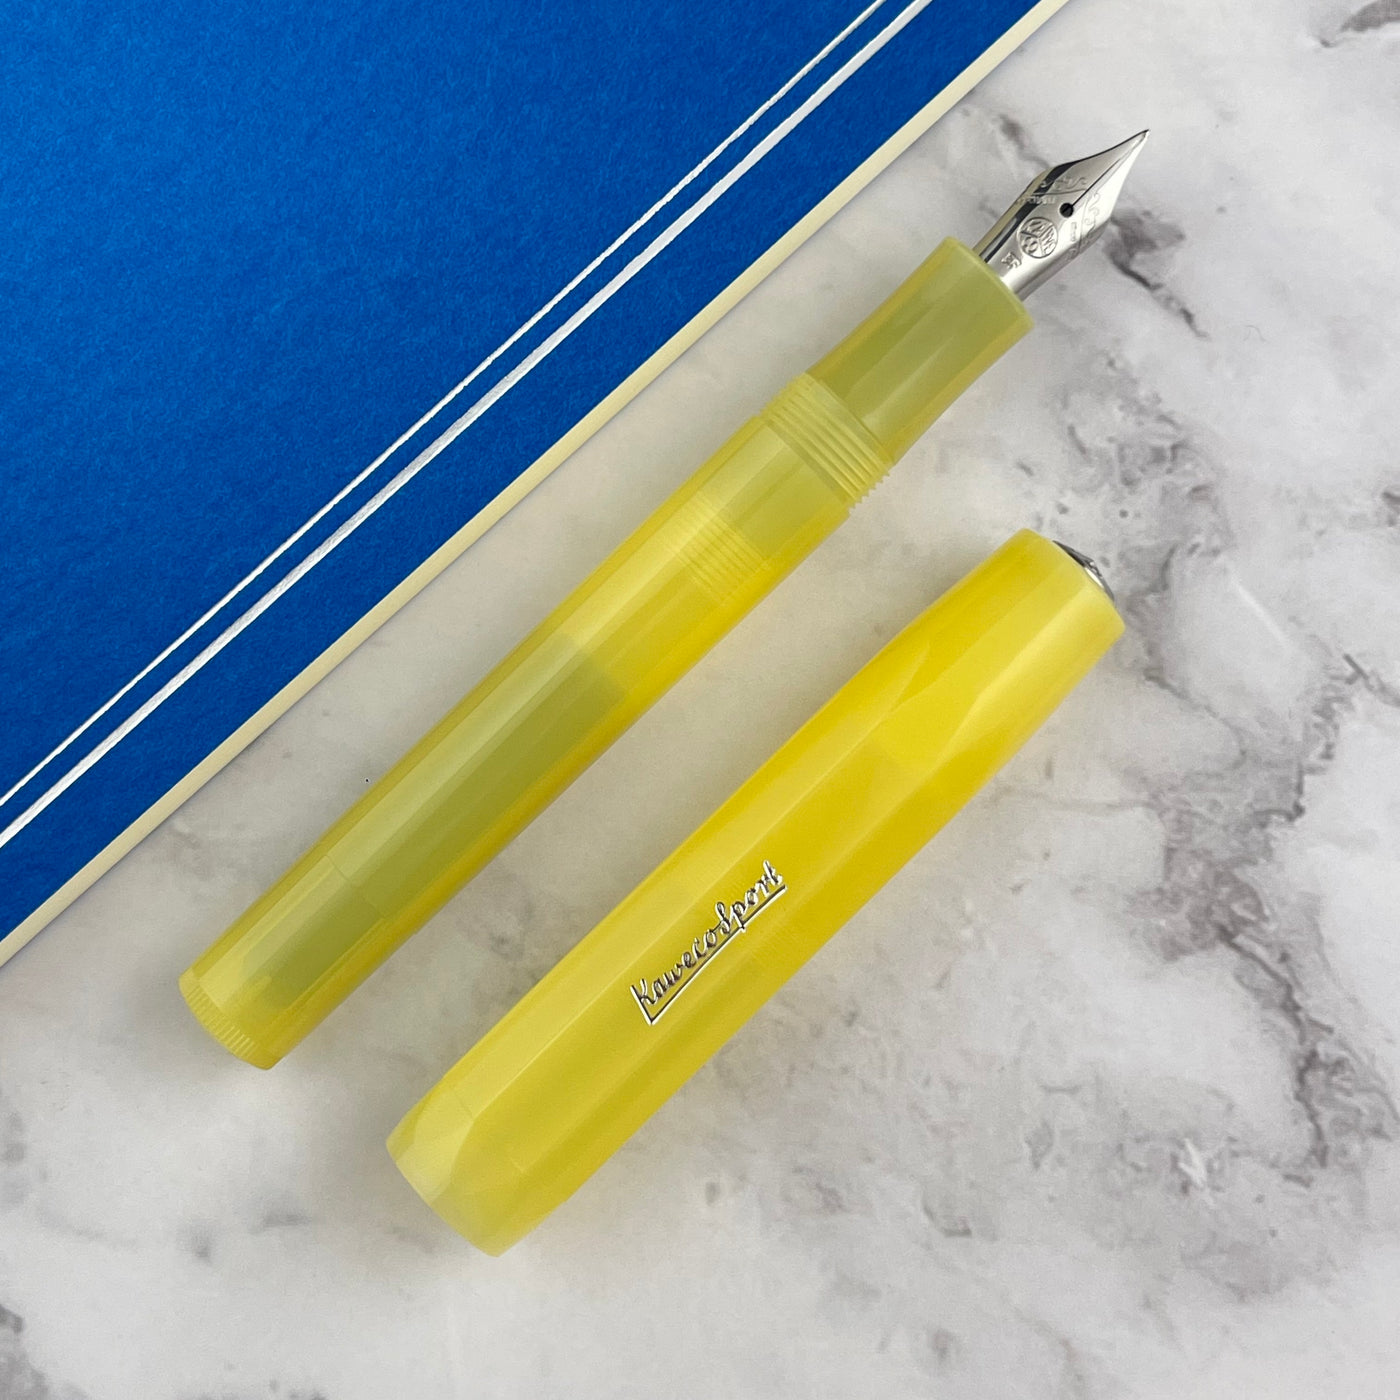 Kaweco Frosted Sport Fountain Pen - Banana